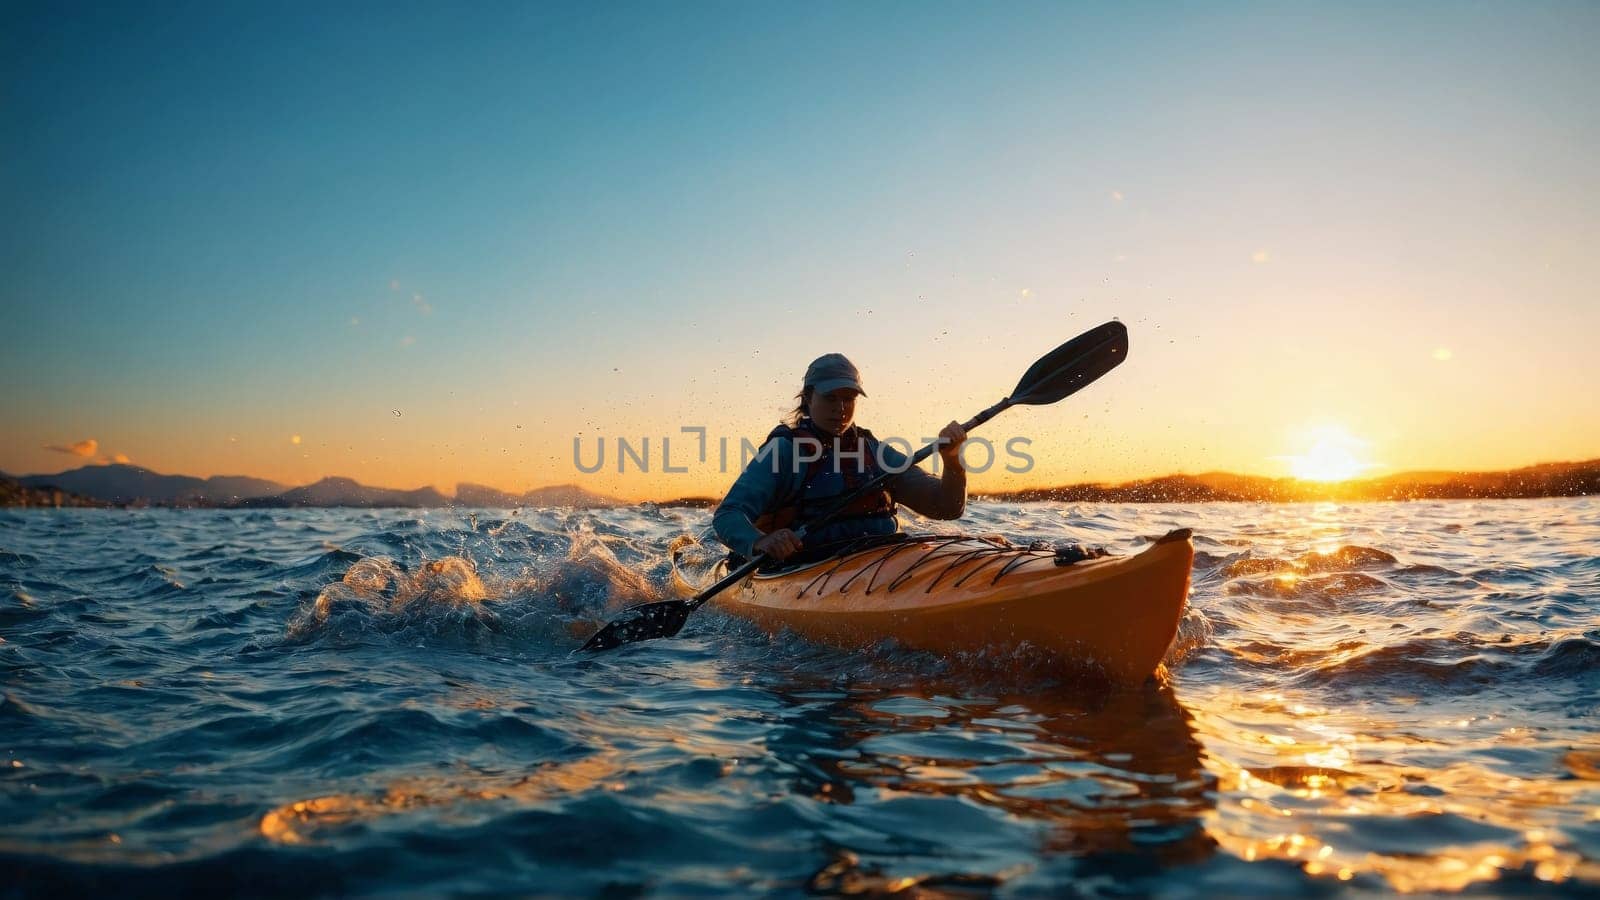 Sunset filtering through water drops on sea kayak paddle vibrant orange and blue outdoor adventure by panophotograph